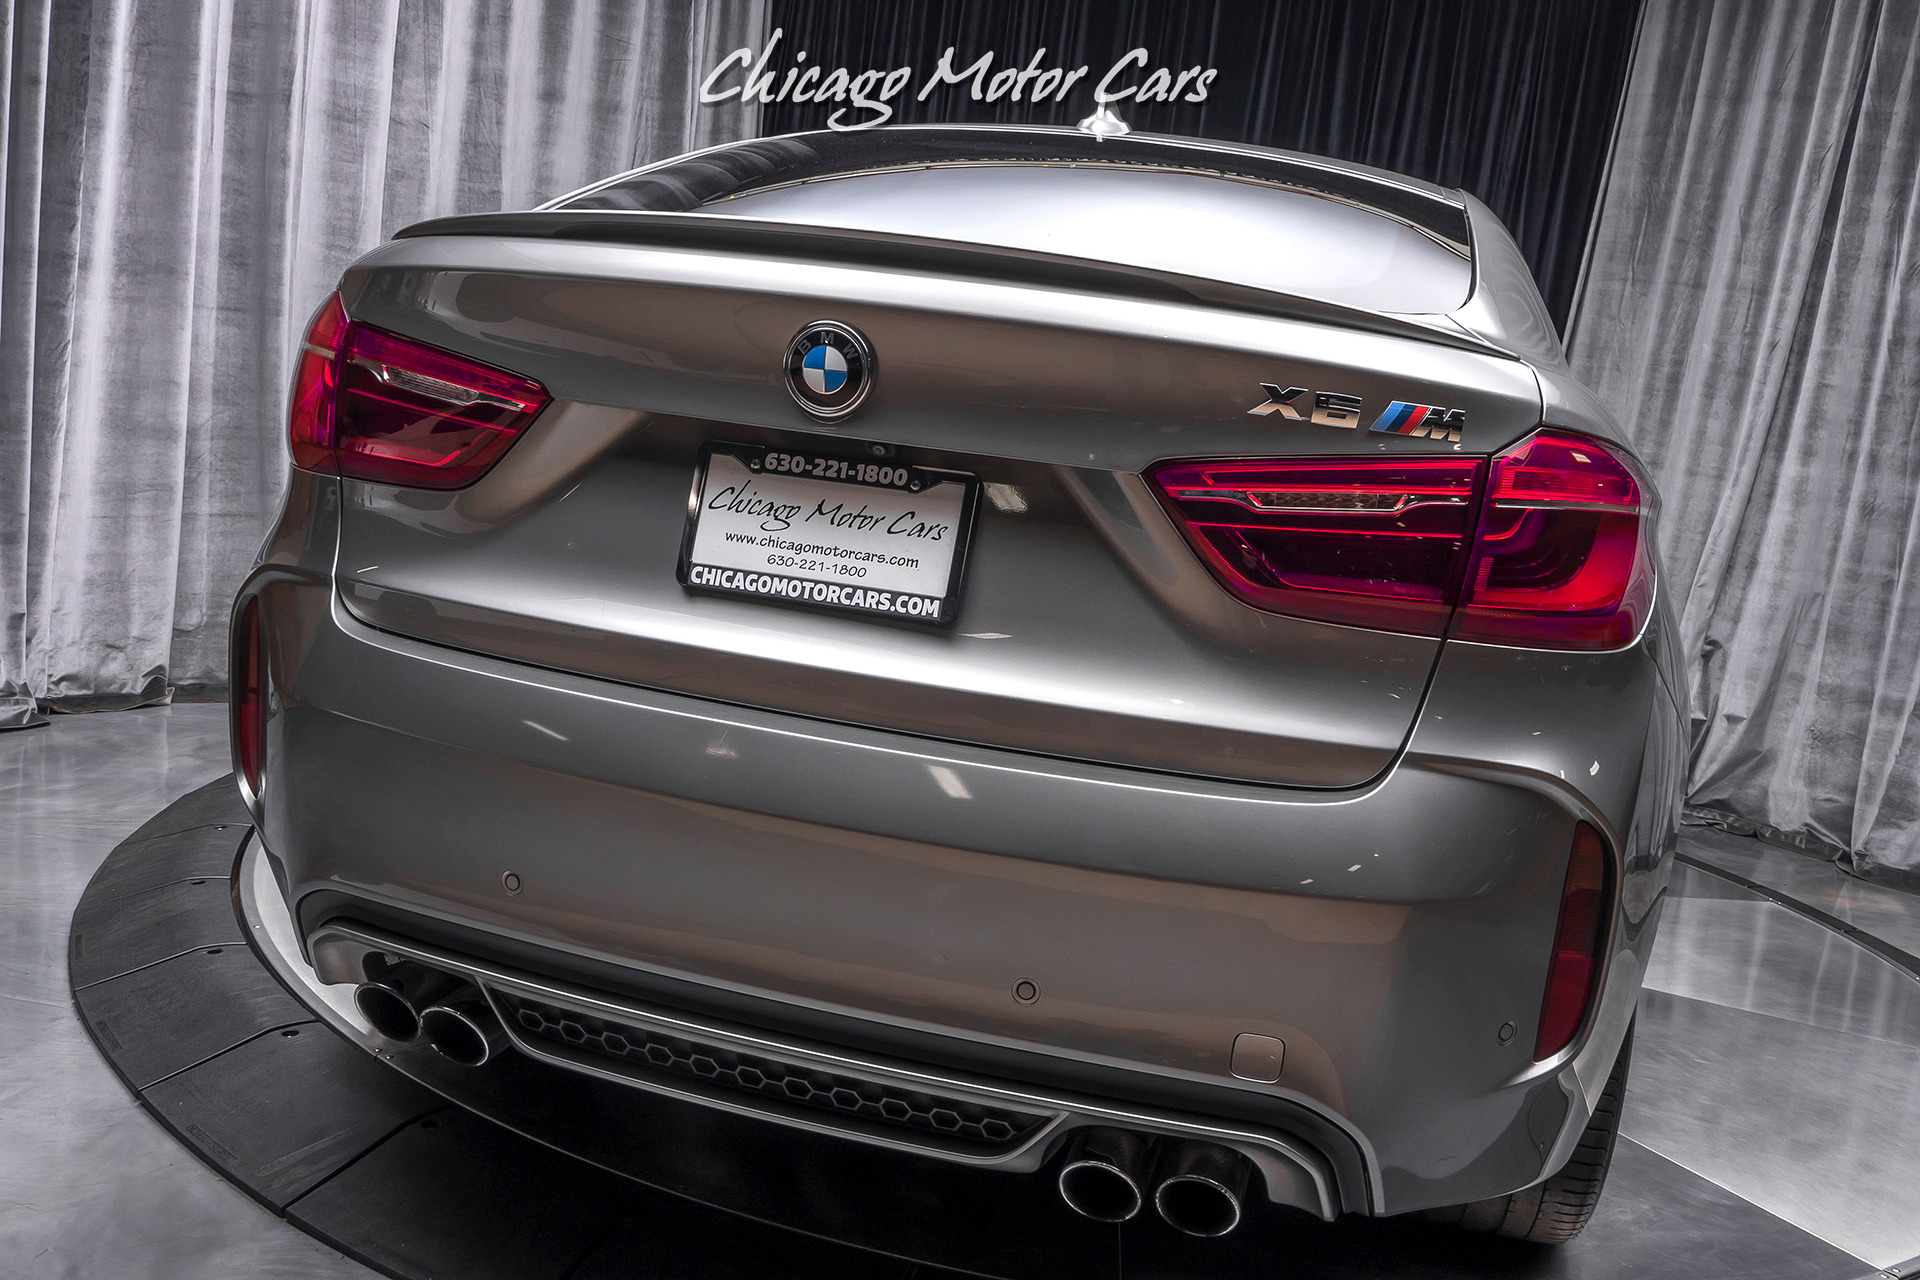 Used-2017-BMW-X6-M-AWD-SUV-MSRP-112K-EXECUTIVE-PACKAGE